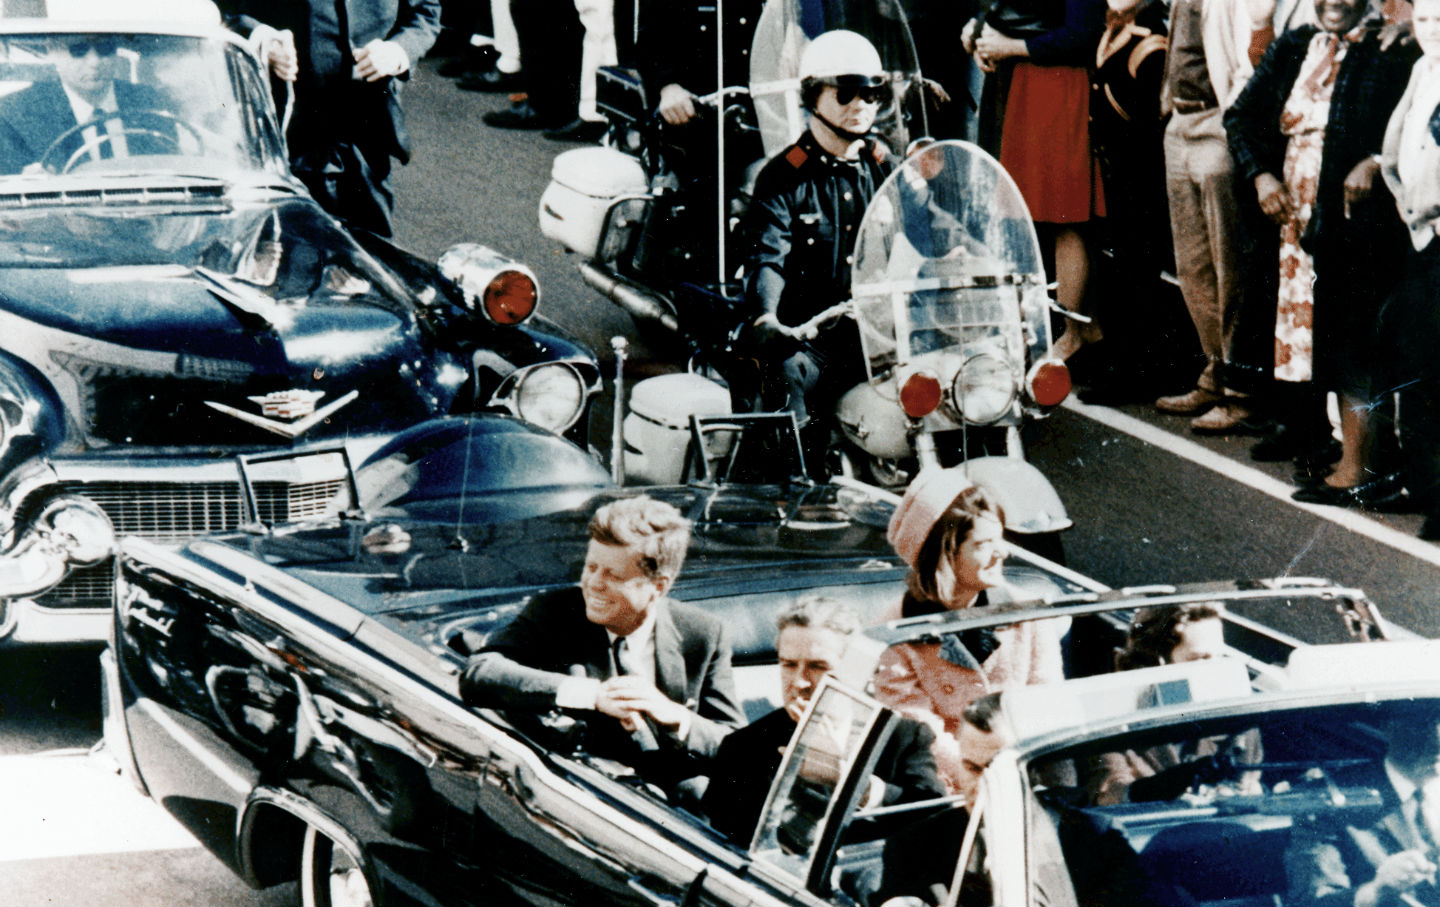 The presidency and assassination of us president john f kennedy in 1963